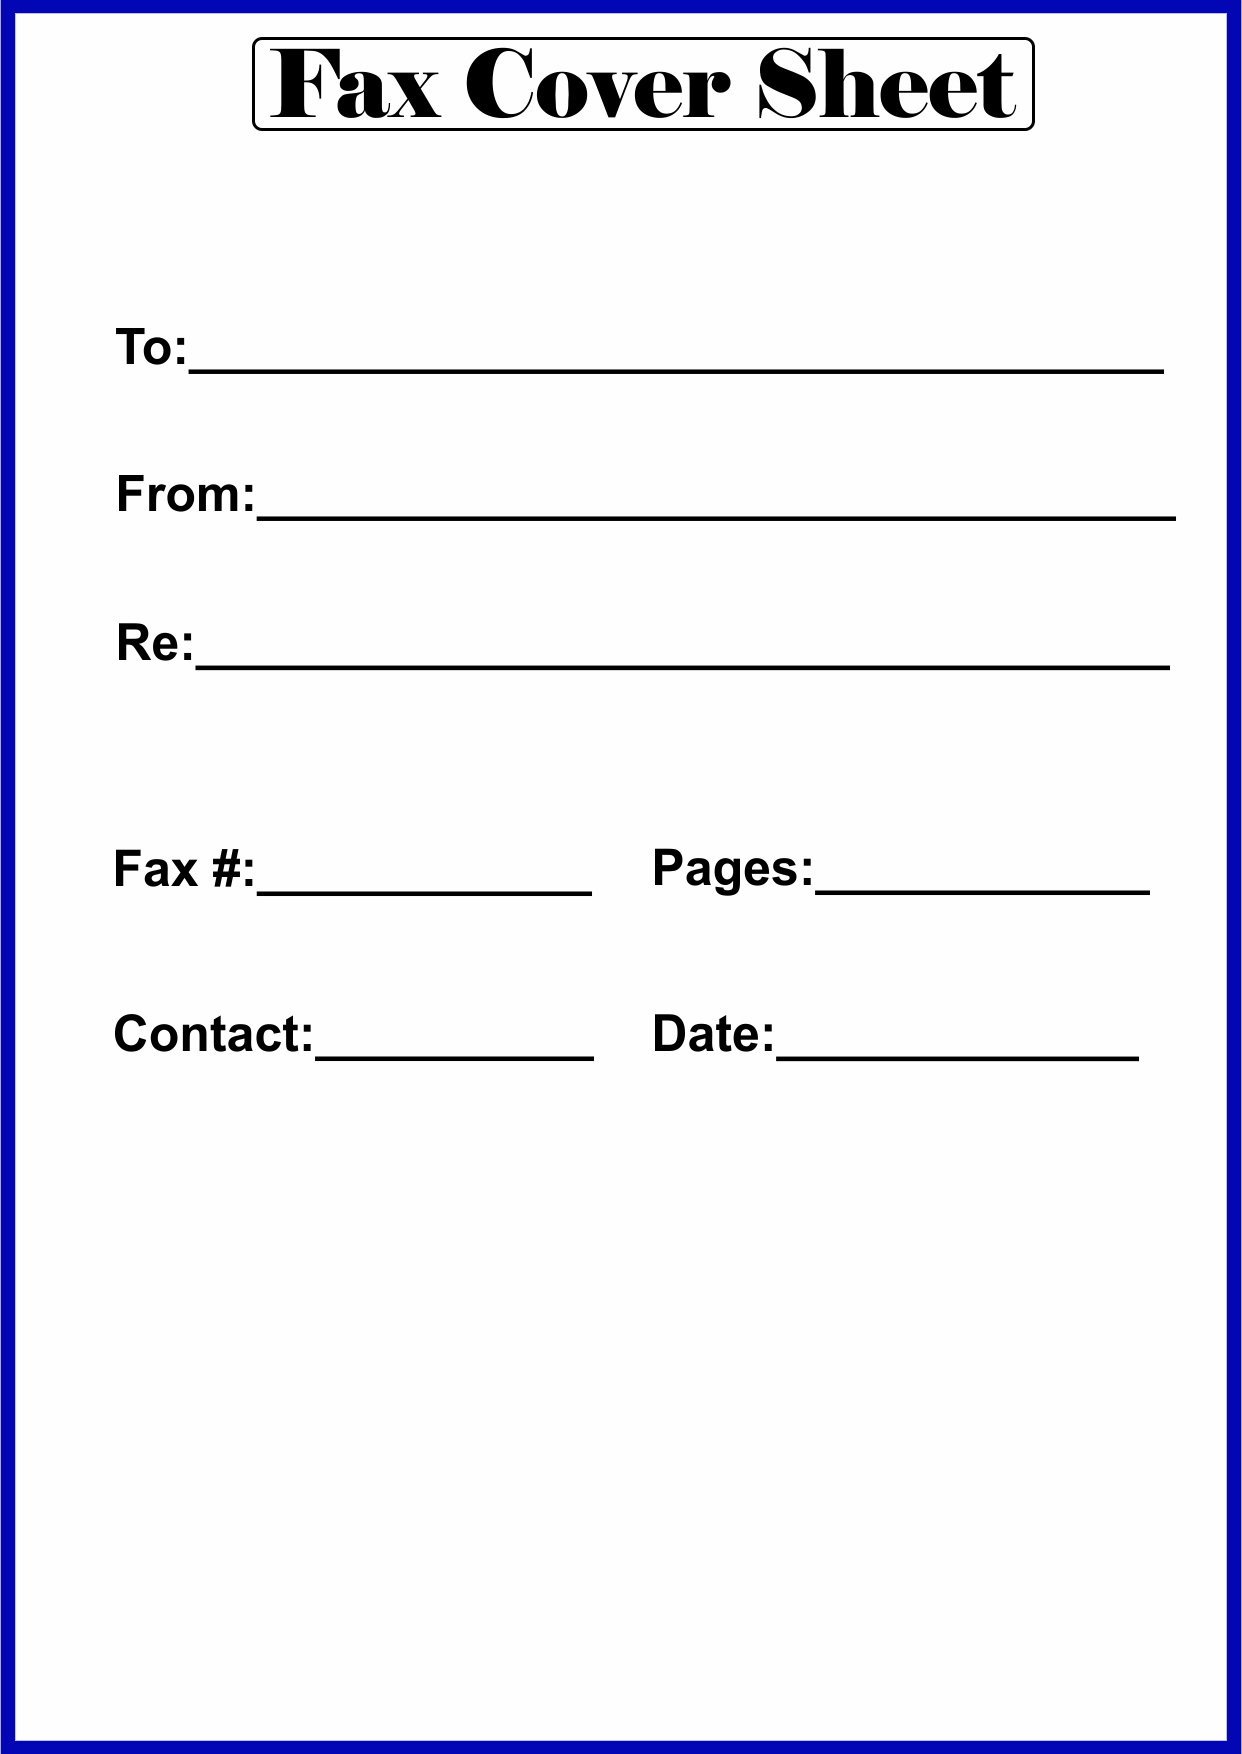 Free Fax Template Printable from faxcoversheethub.com